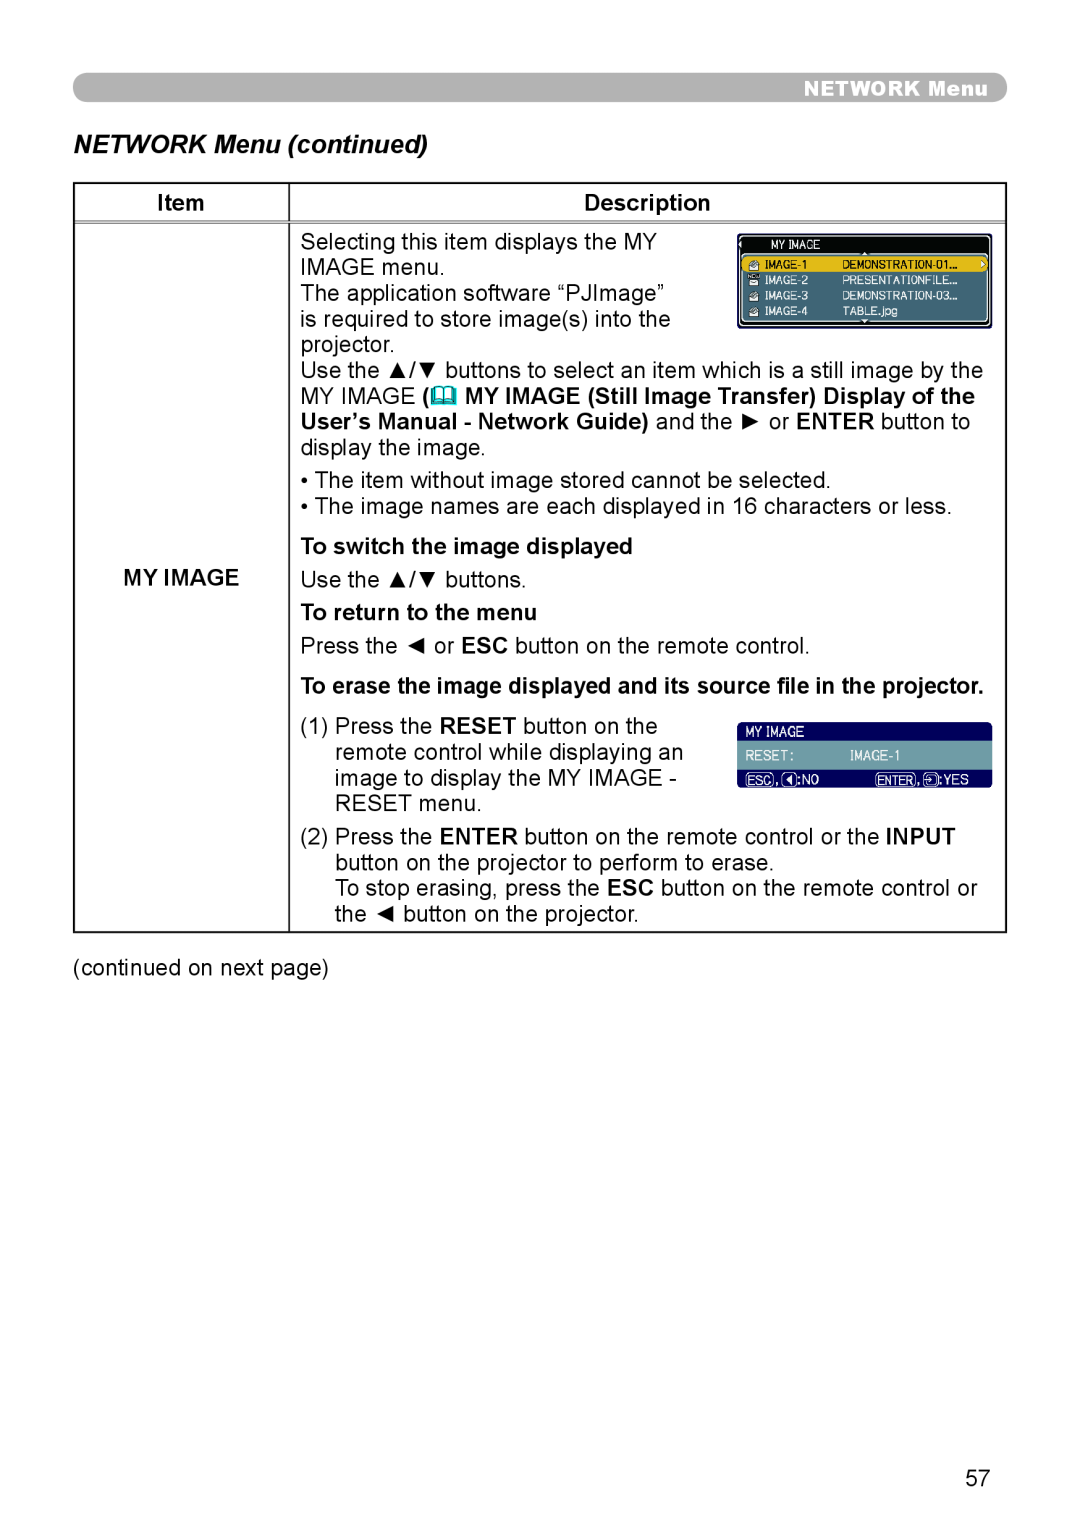 Hitachi CP-X306 NETWORK Menu continued, Description, My Image, To switch the image displayed, To return to the menu 